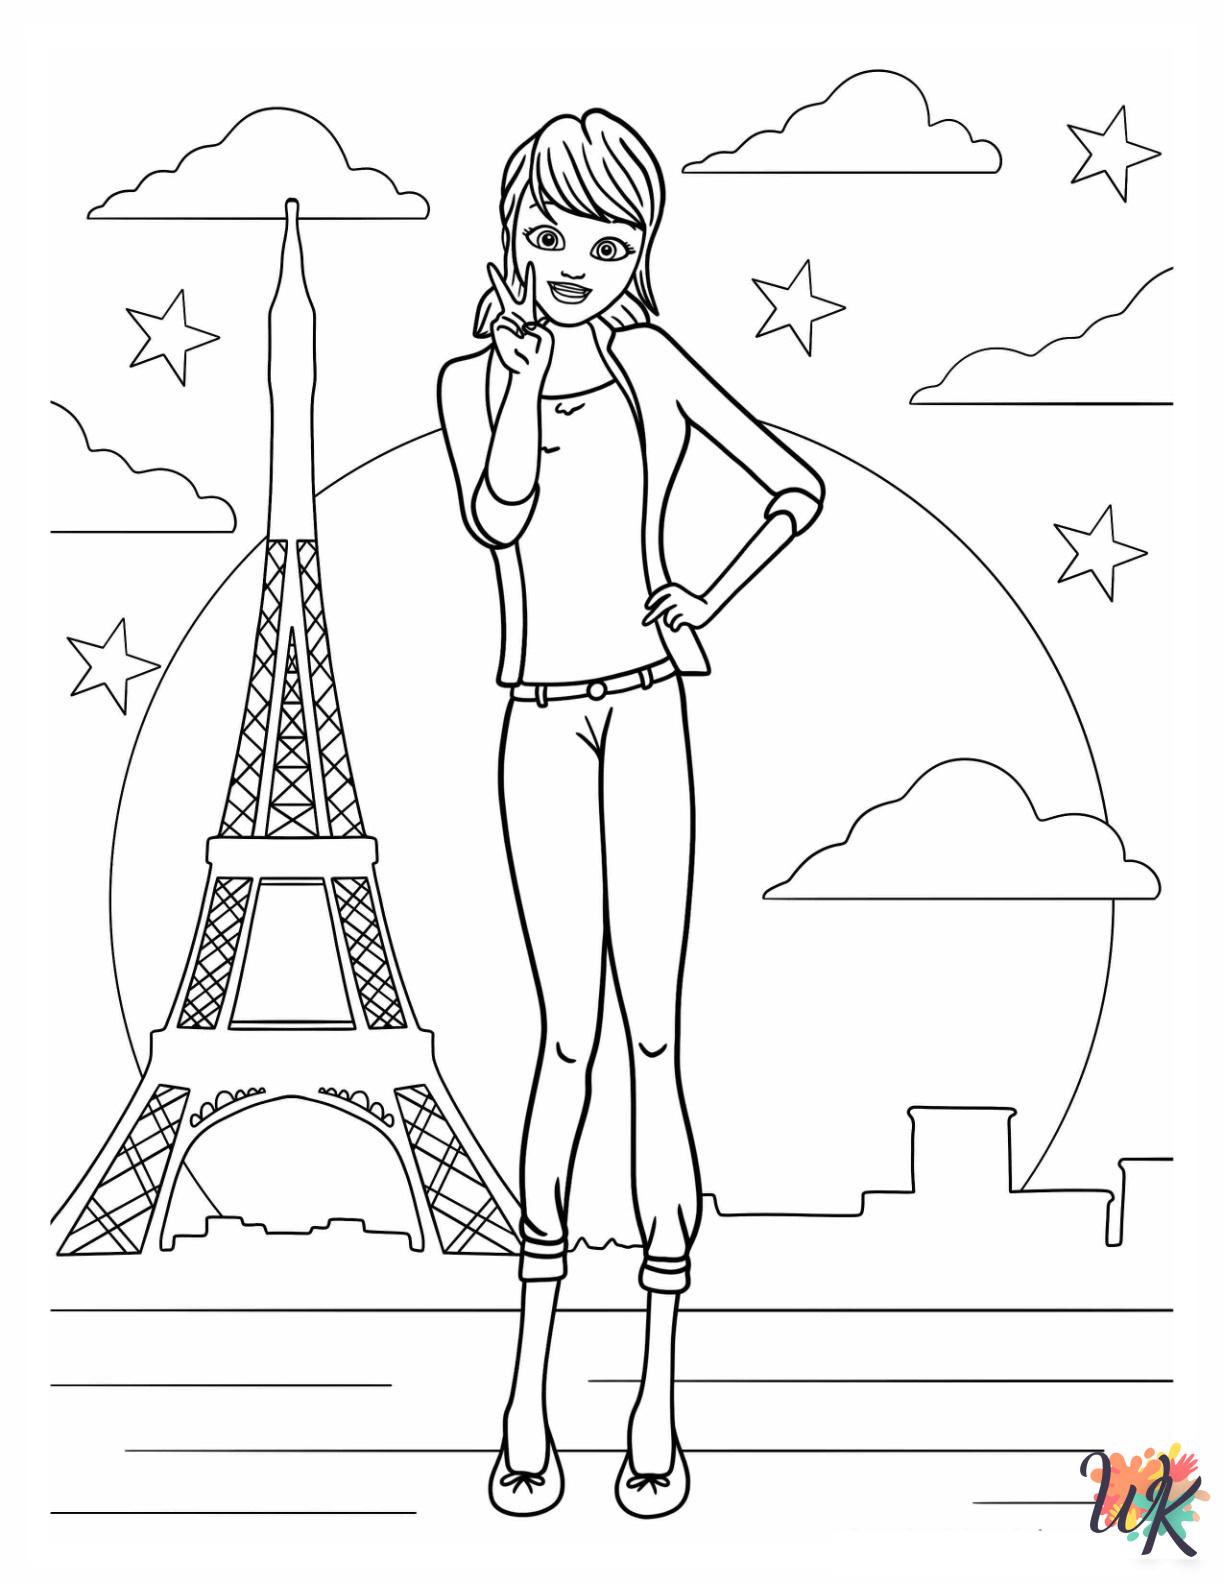 Miraculous Ladybug coloring pages for adults pdf